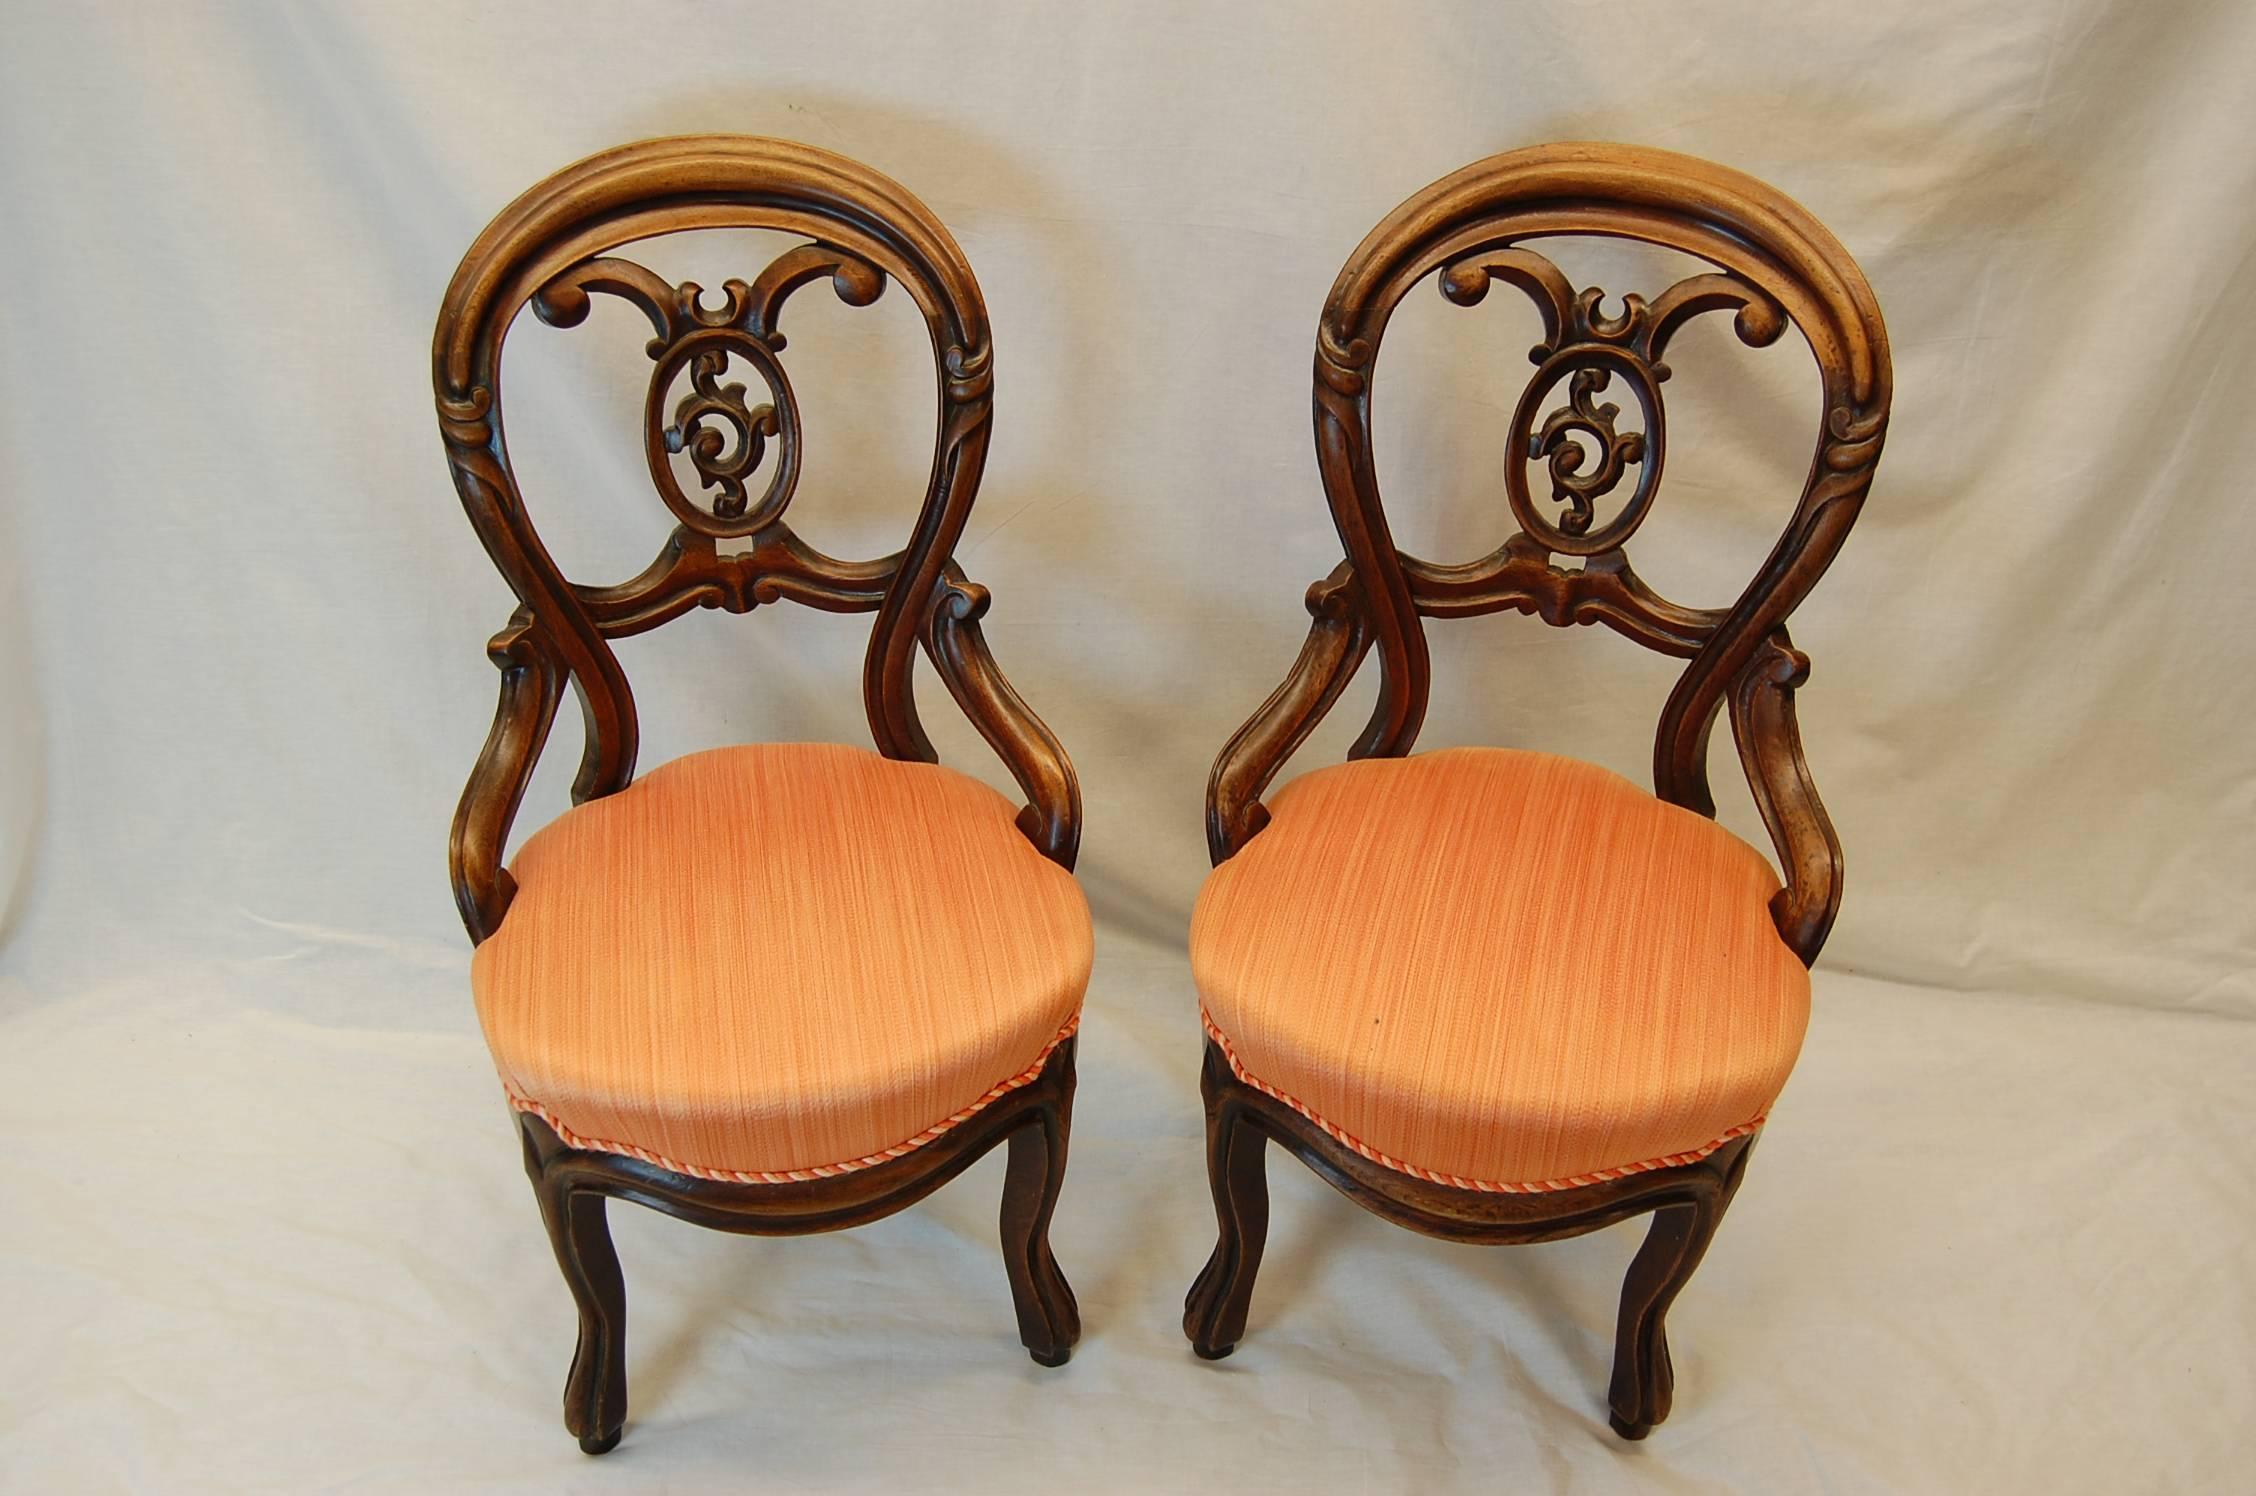 Pair of Walnut chairs in excellent condition, currently covered in a strie' Salmon cotton. Springs and structure are in excellent condition. From the estate of Herbert I. Frank, a 19th century Pittsburgh industrialist.